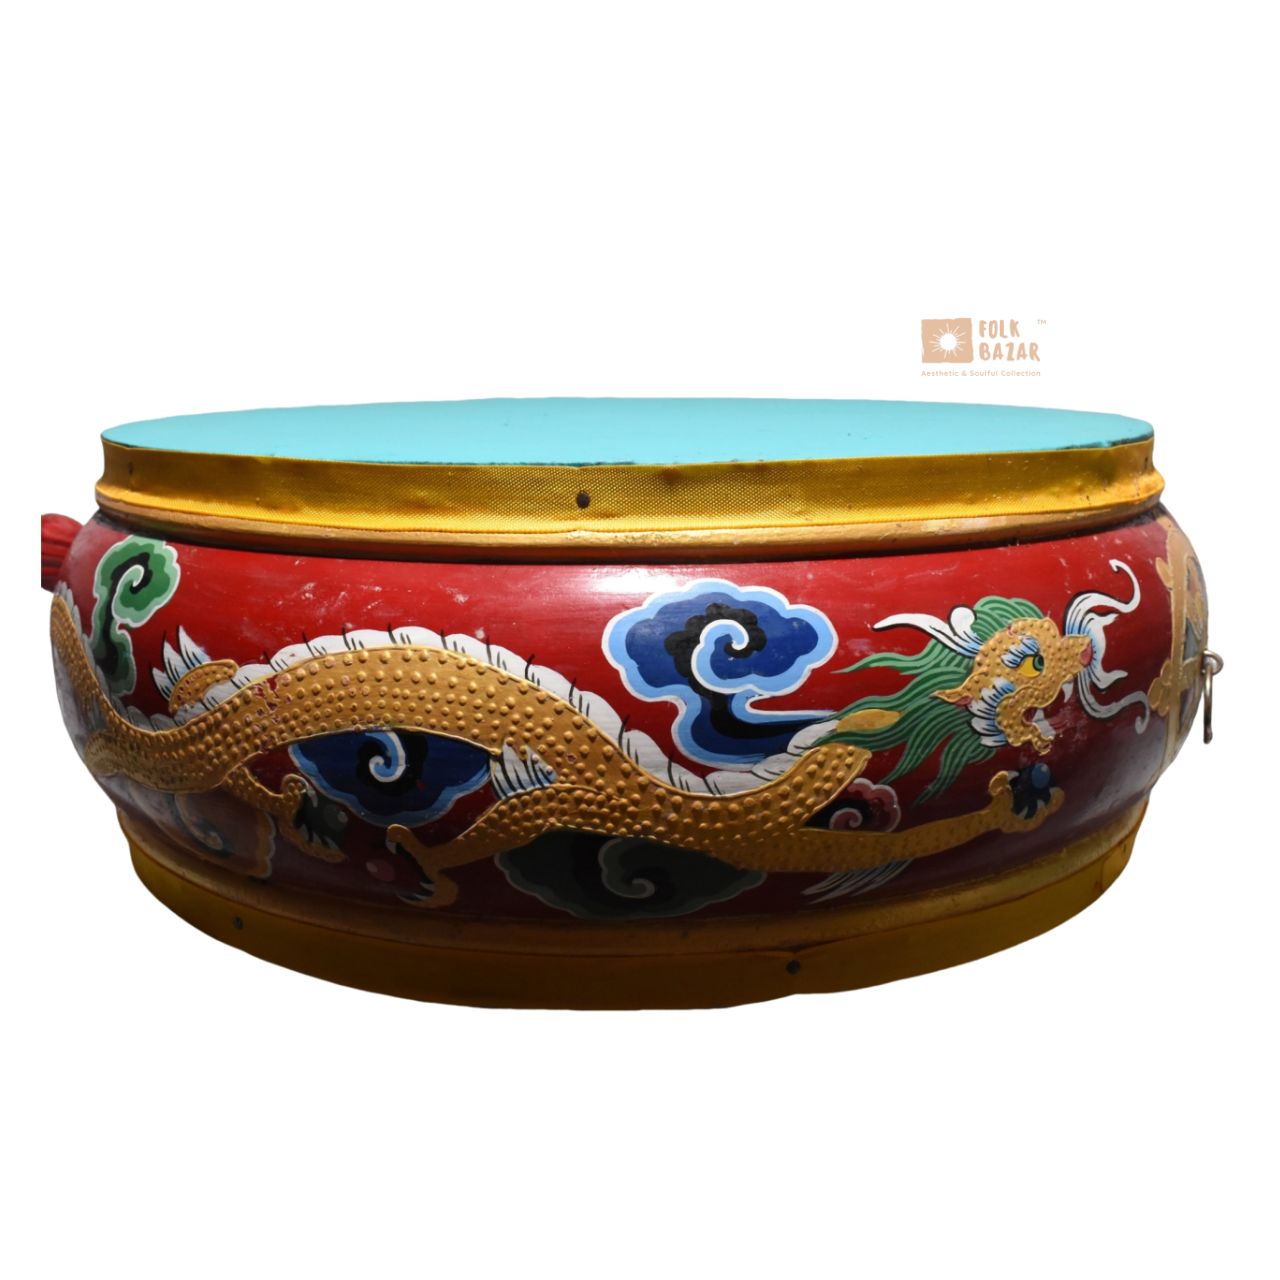 Handmade Wooden Painted Dhangro (Nga Drum) with Foldable Handles & Sung Inside